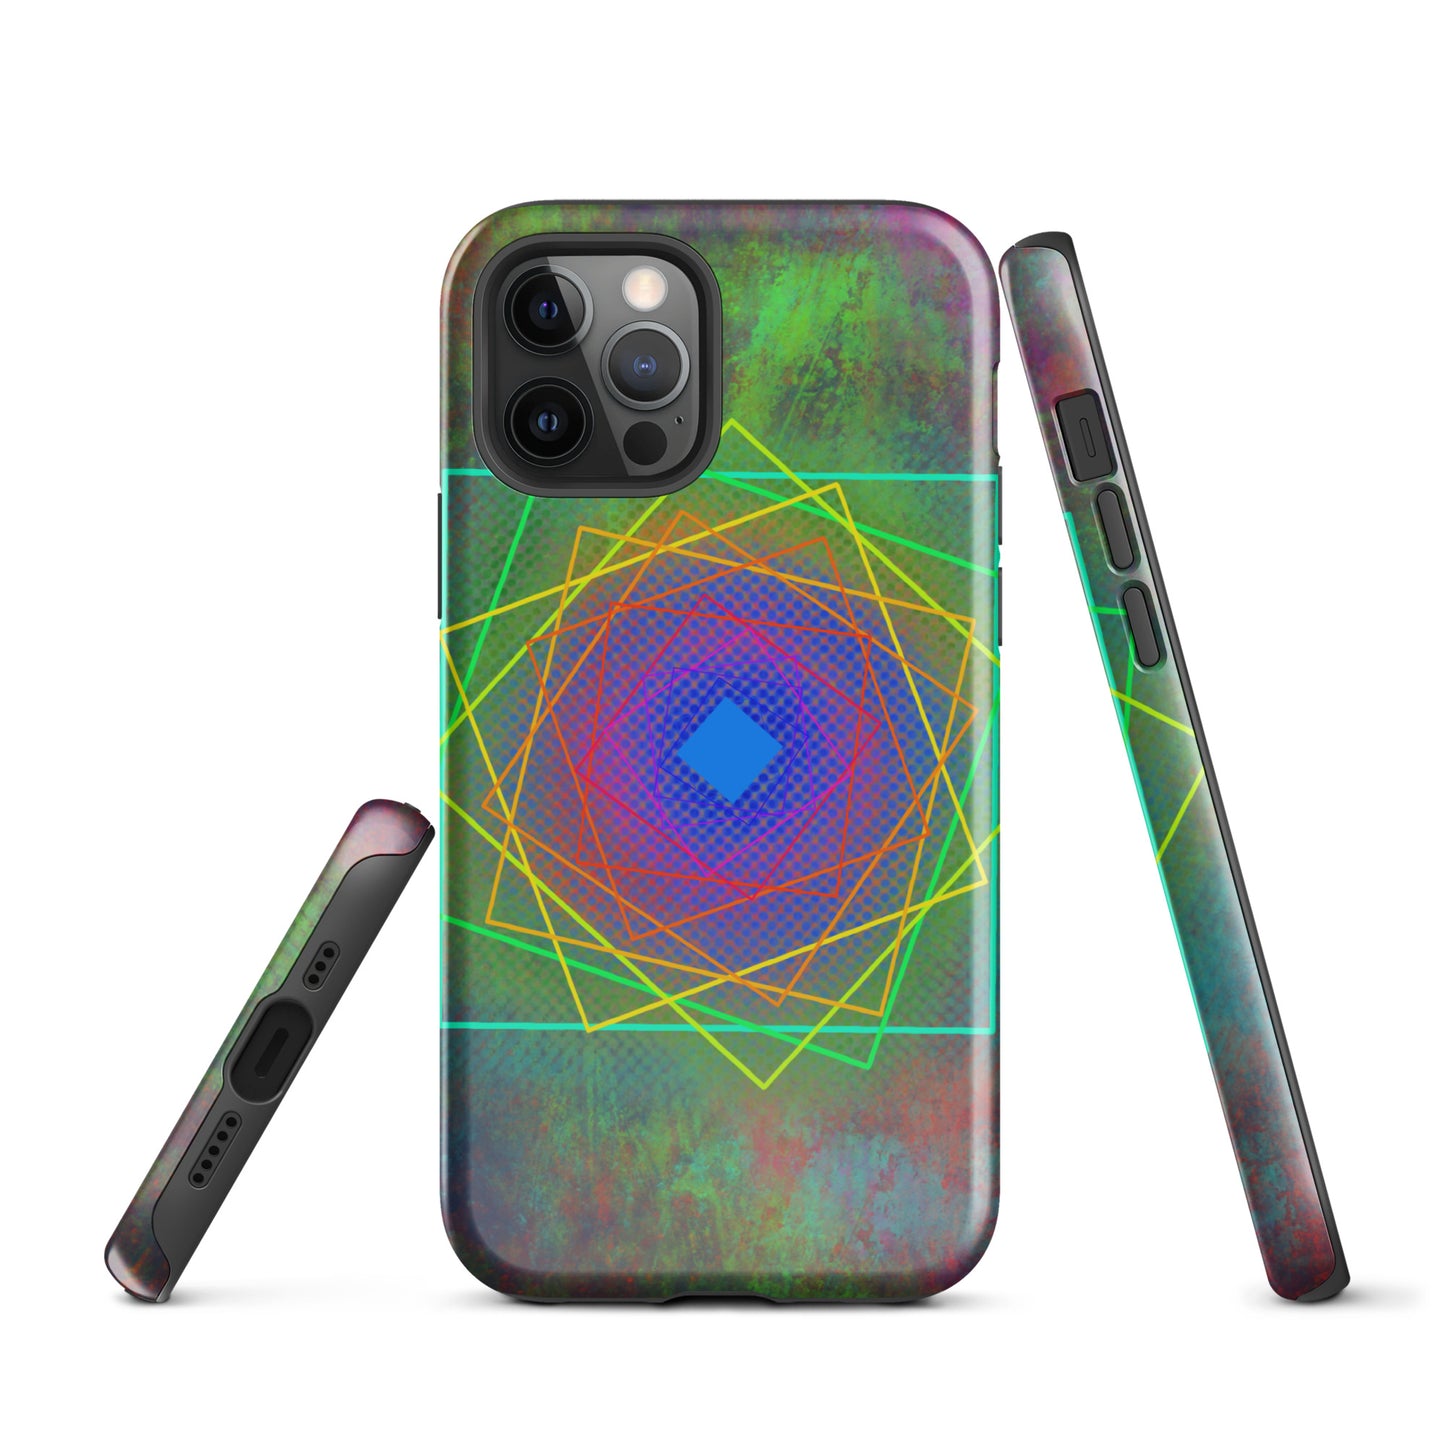 A Colourful Geometric Cubes Case for the iPhone 12 Pro